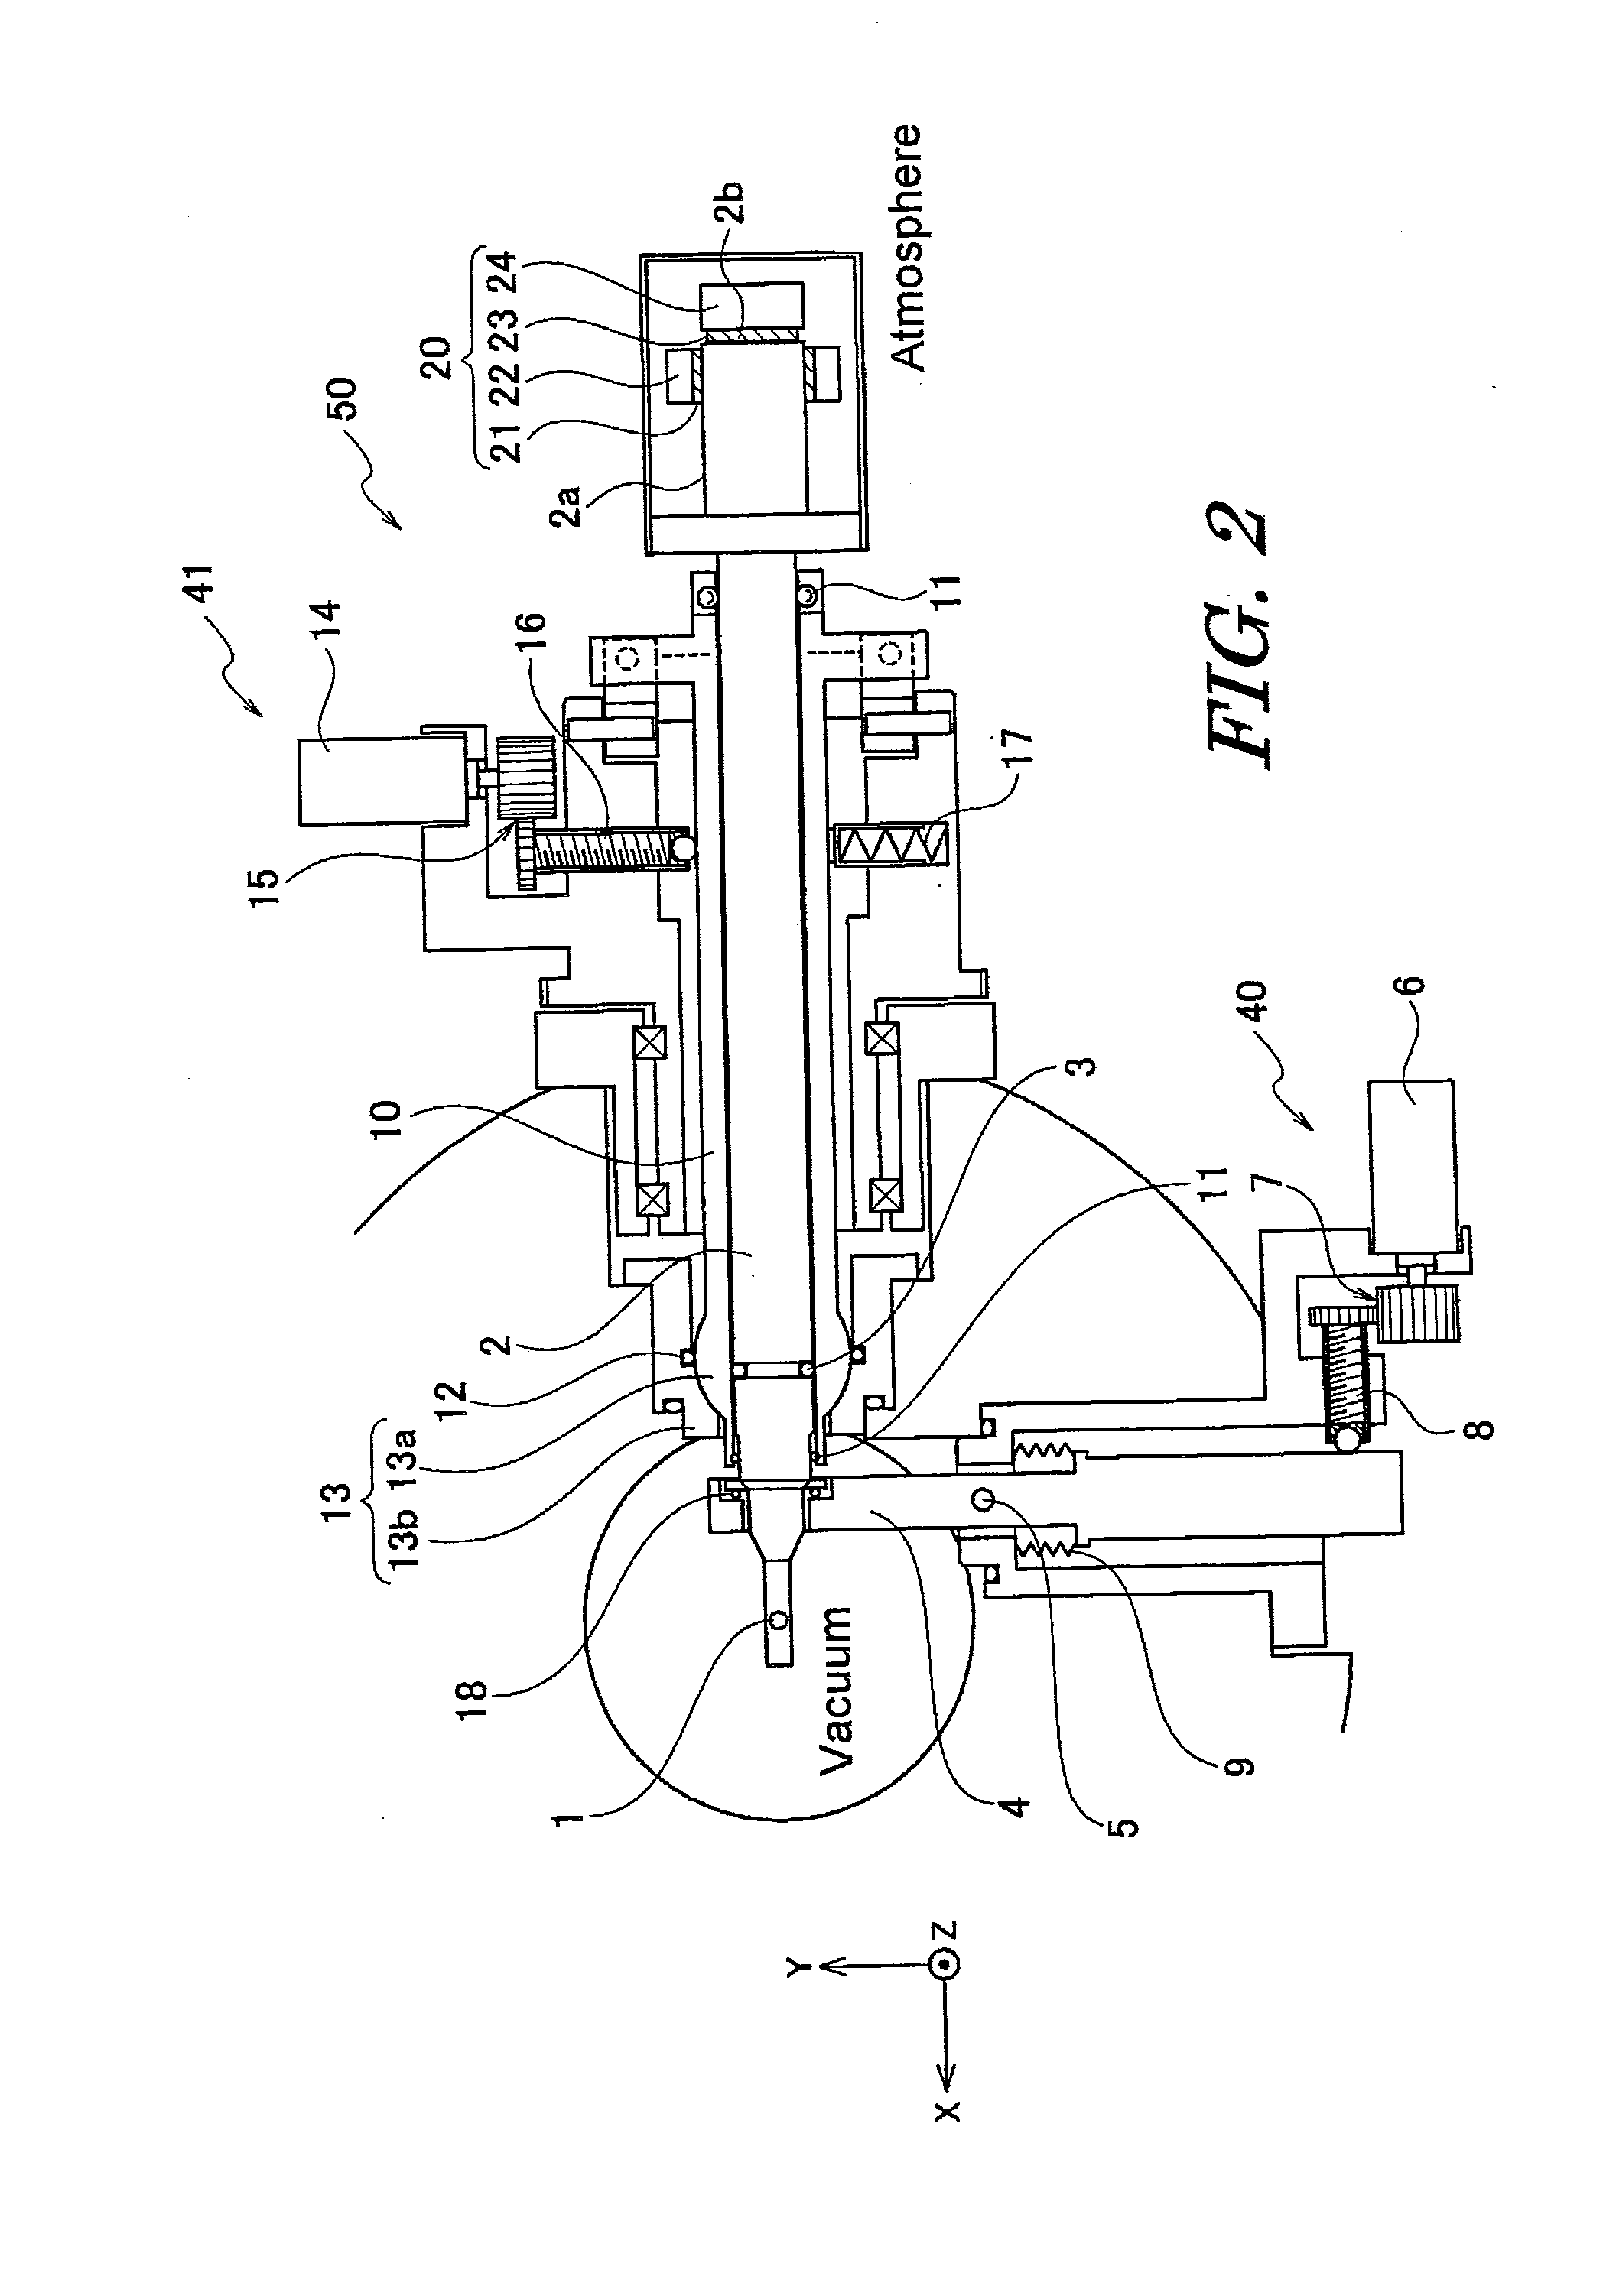 Object-Positioning Device for Charged-Particle Beam System